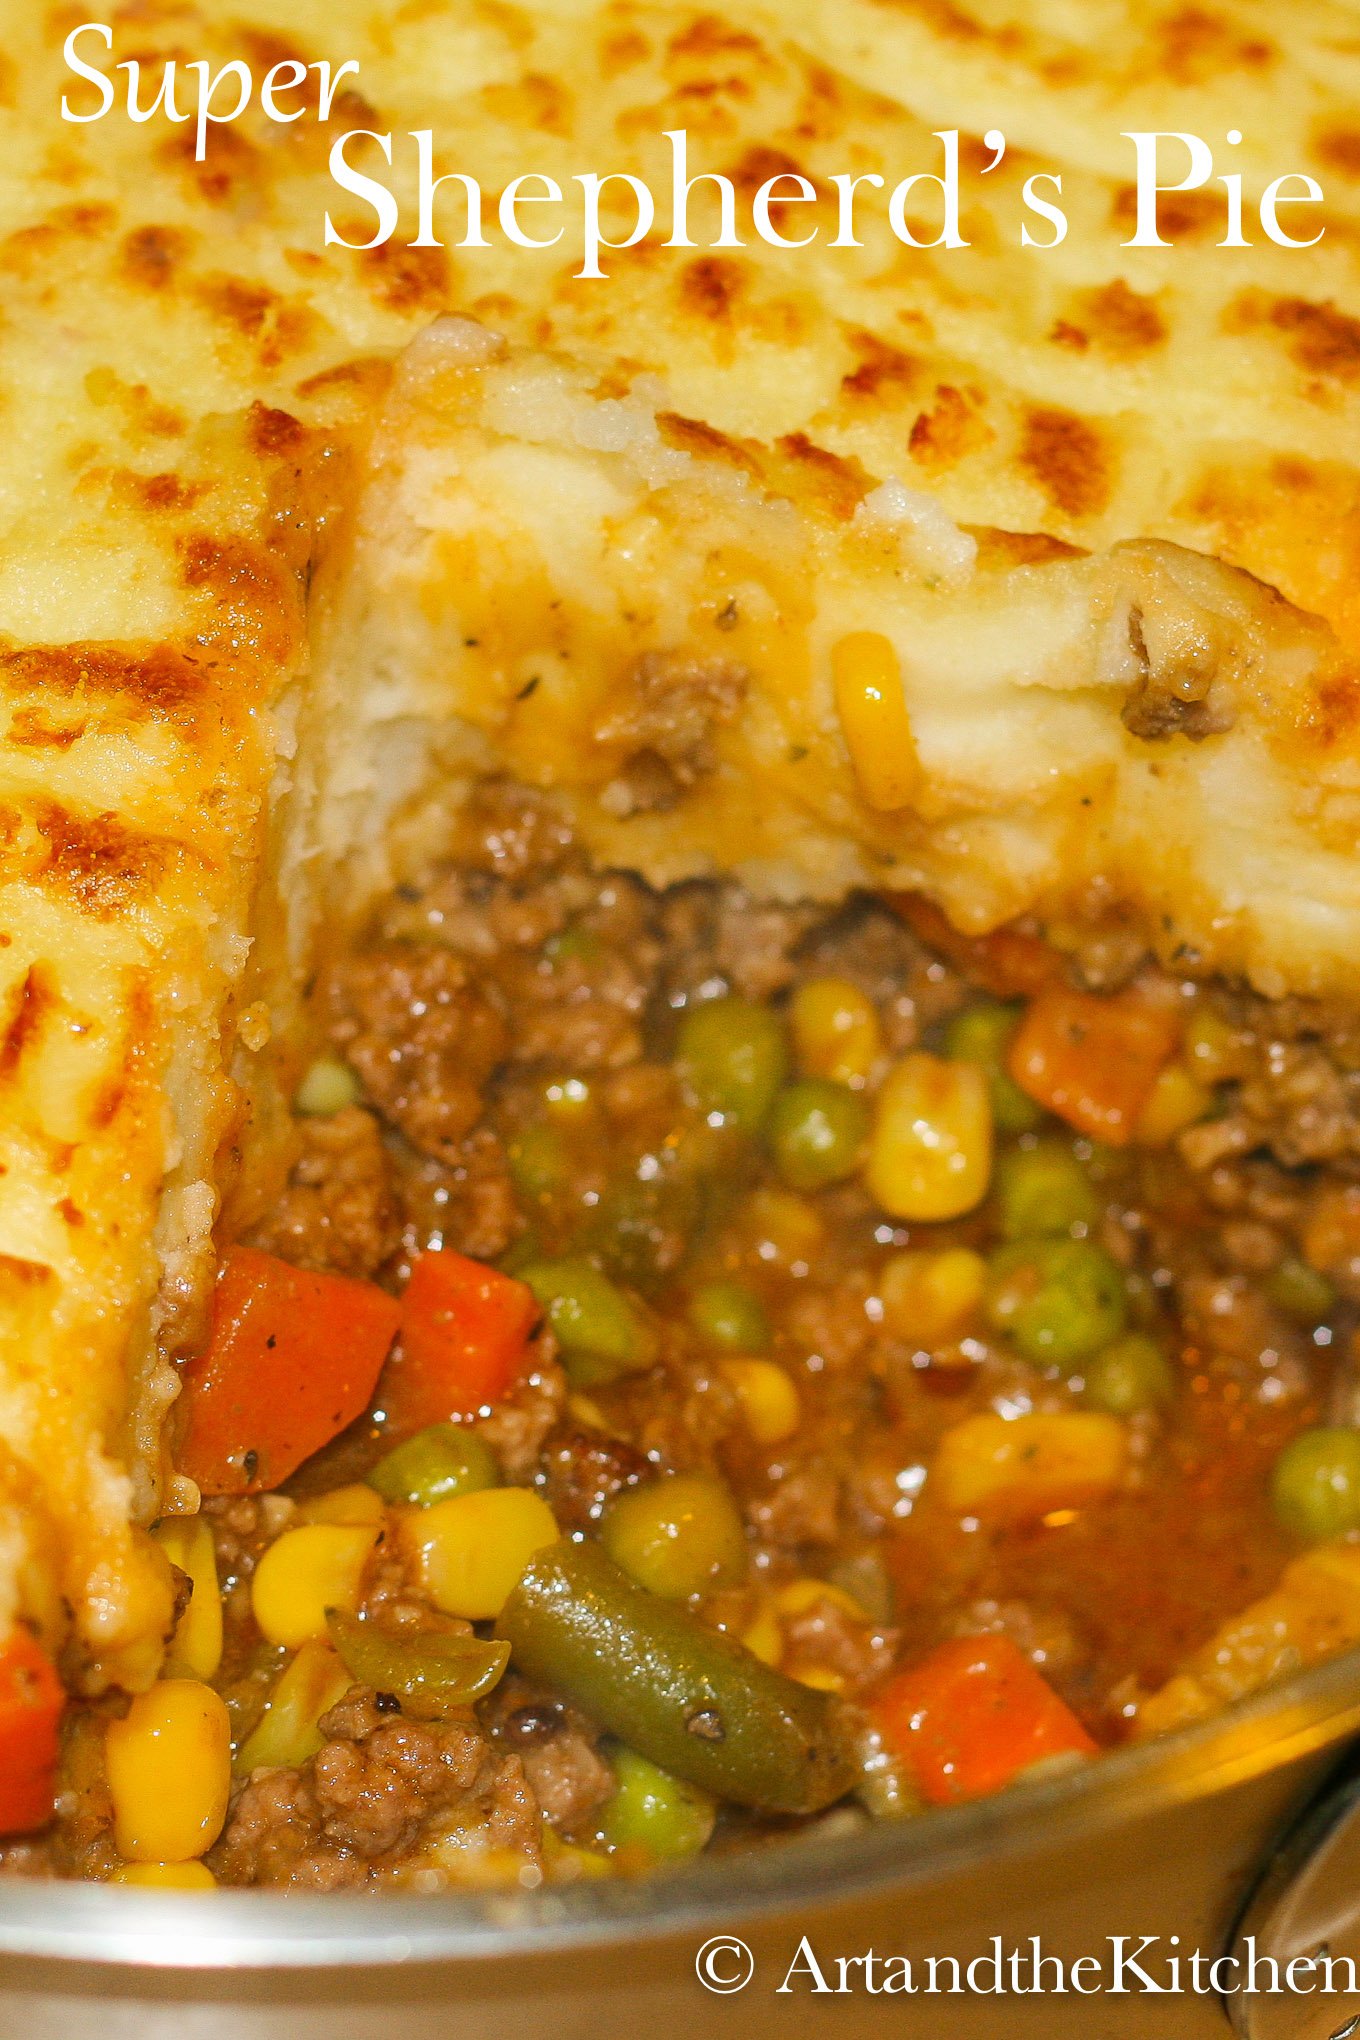 Super Shepherd’s Pie is one of my family’s most requested recipes. This ultimate comfort food recipe has a rich tasty gravy, ground beef, veggies topped with fluffy mashed potatoes. via @artandthekitch